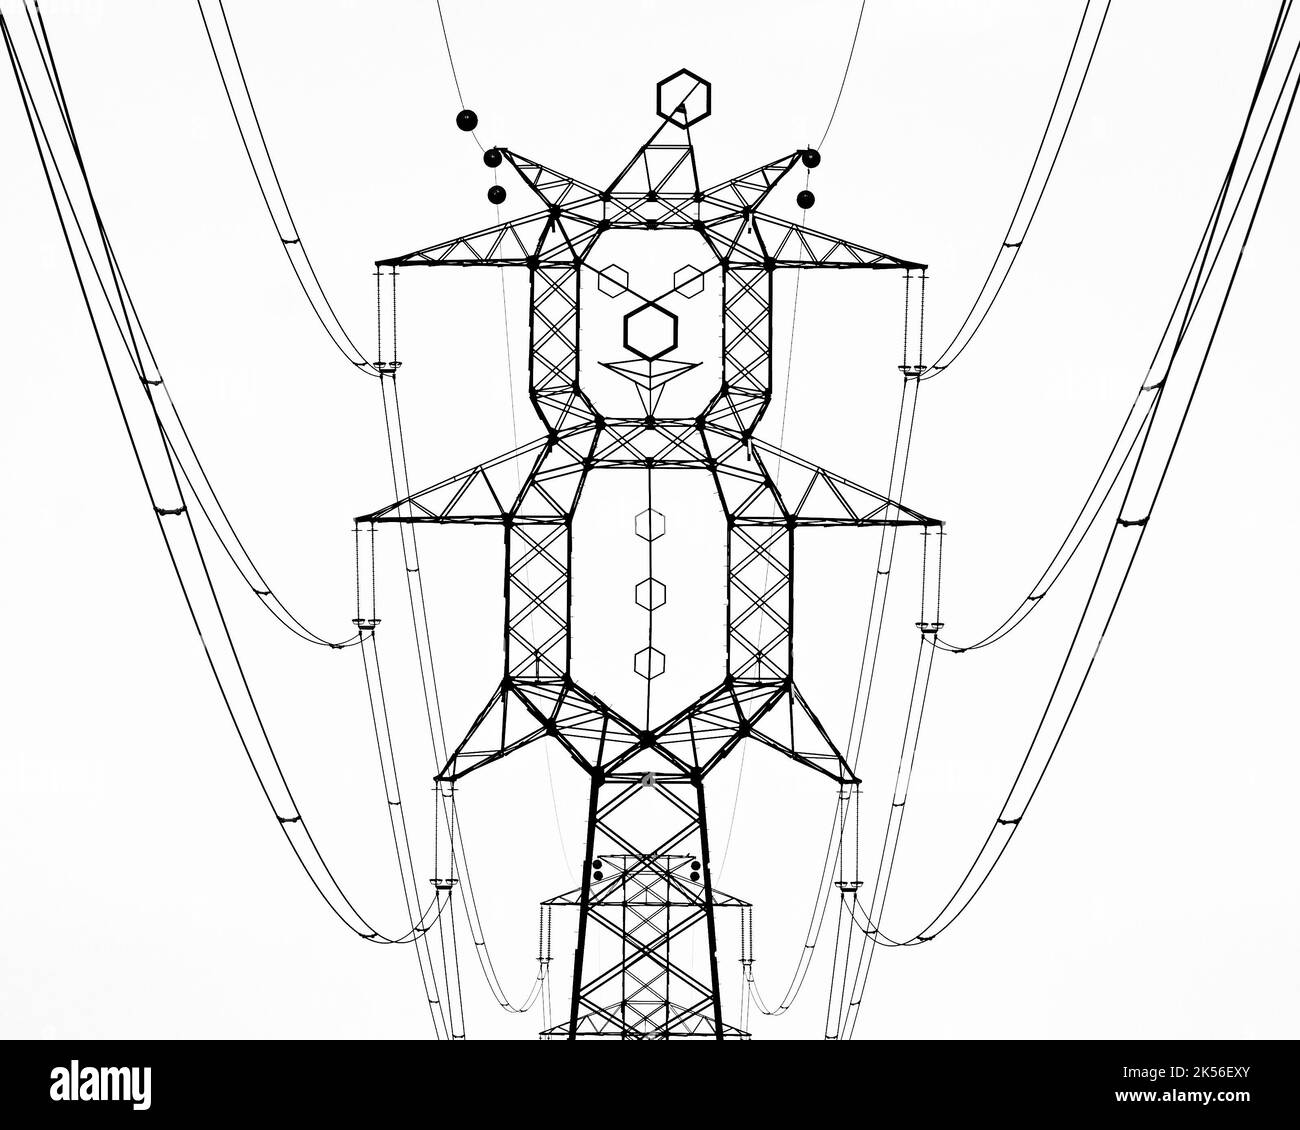 Drawing electricity Black and White Stock Photos & Images - Alamy